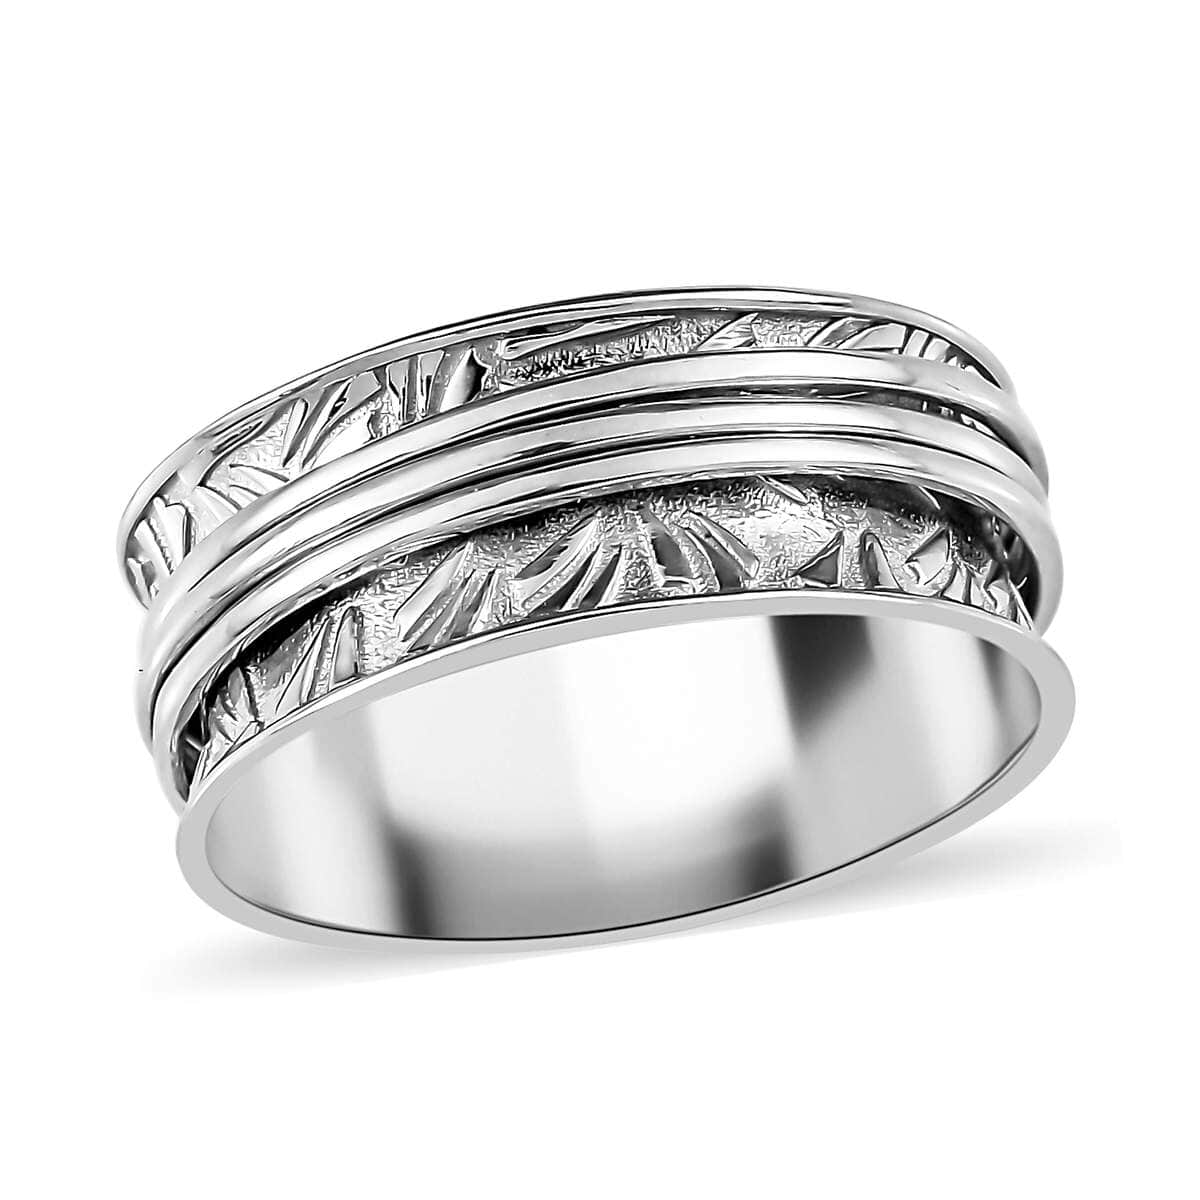 Spinner Ring in Sterling Silver, Anxiety Ring for Women, Fidget Rings for Anxiety for Women, Stress Relieving Anxiety Ring (Size 11.0) 5.85 Grams image number 0